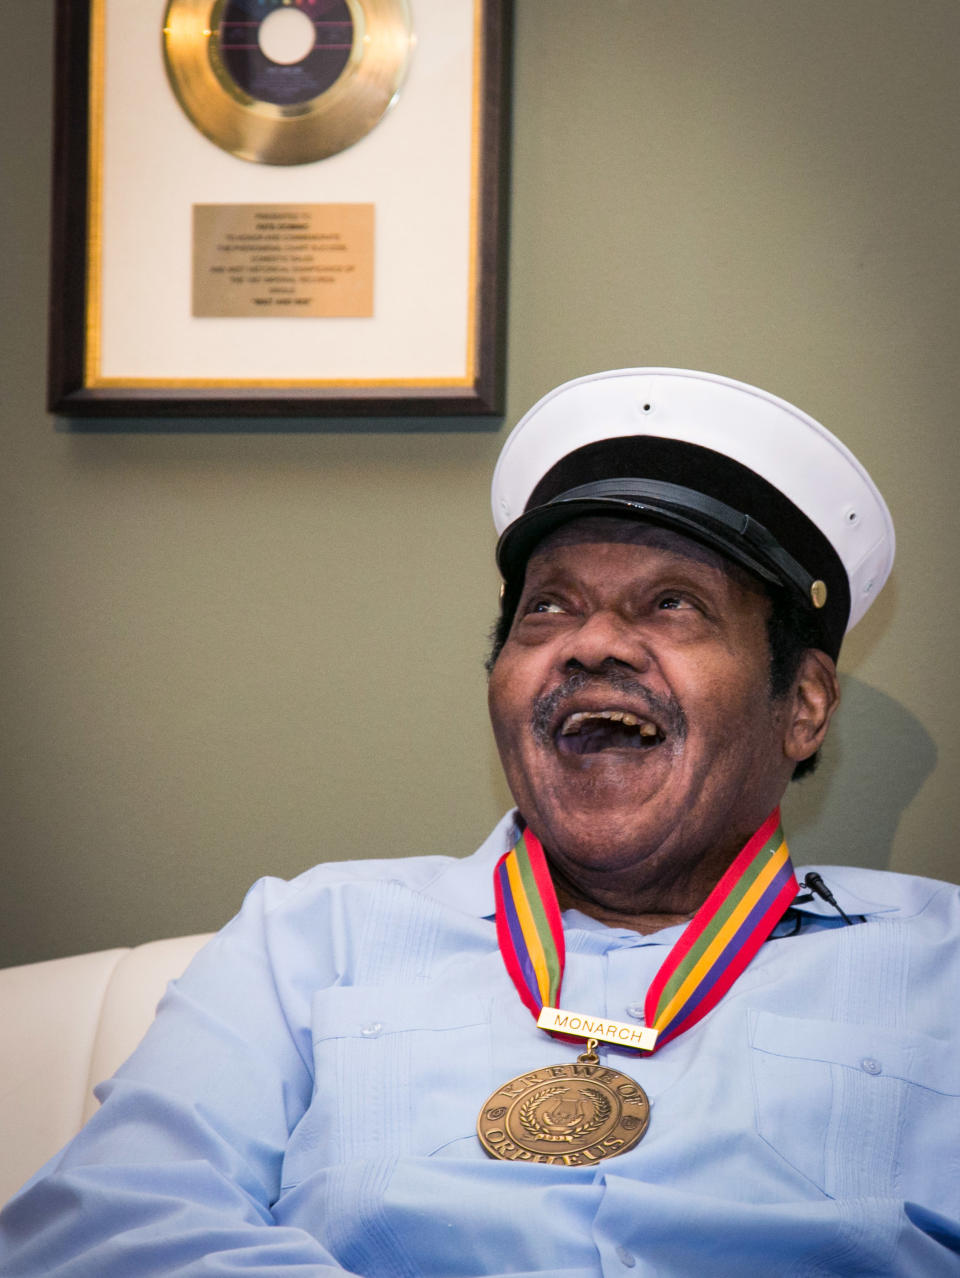 Legendary musician Fats Domino is named "Honorary Grand Marshall" of the Krewe of Orpheus, the star-studded Carnival club that traditionally parades the night before Mardi Gras, Friday, Dec. 20, 2013 in New Orleans. (AP Photo/Doug Parker).